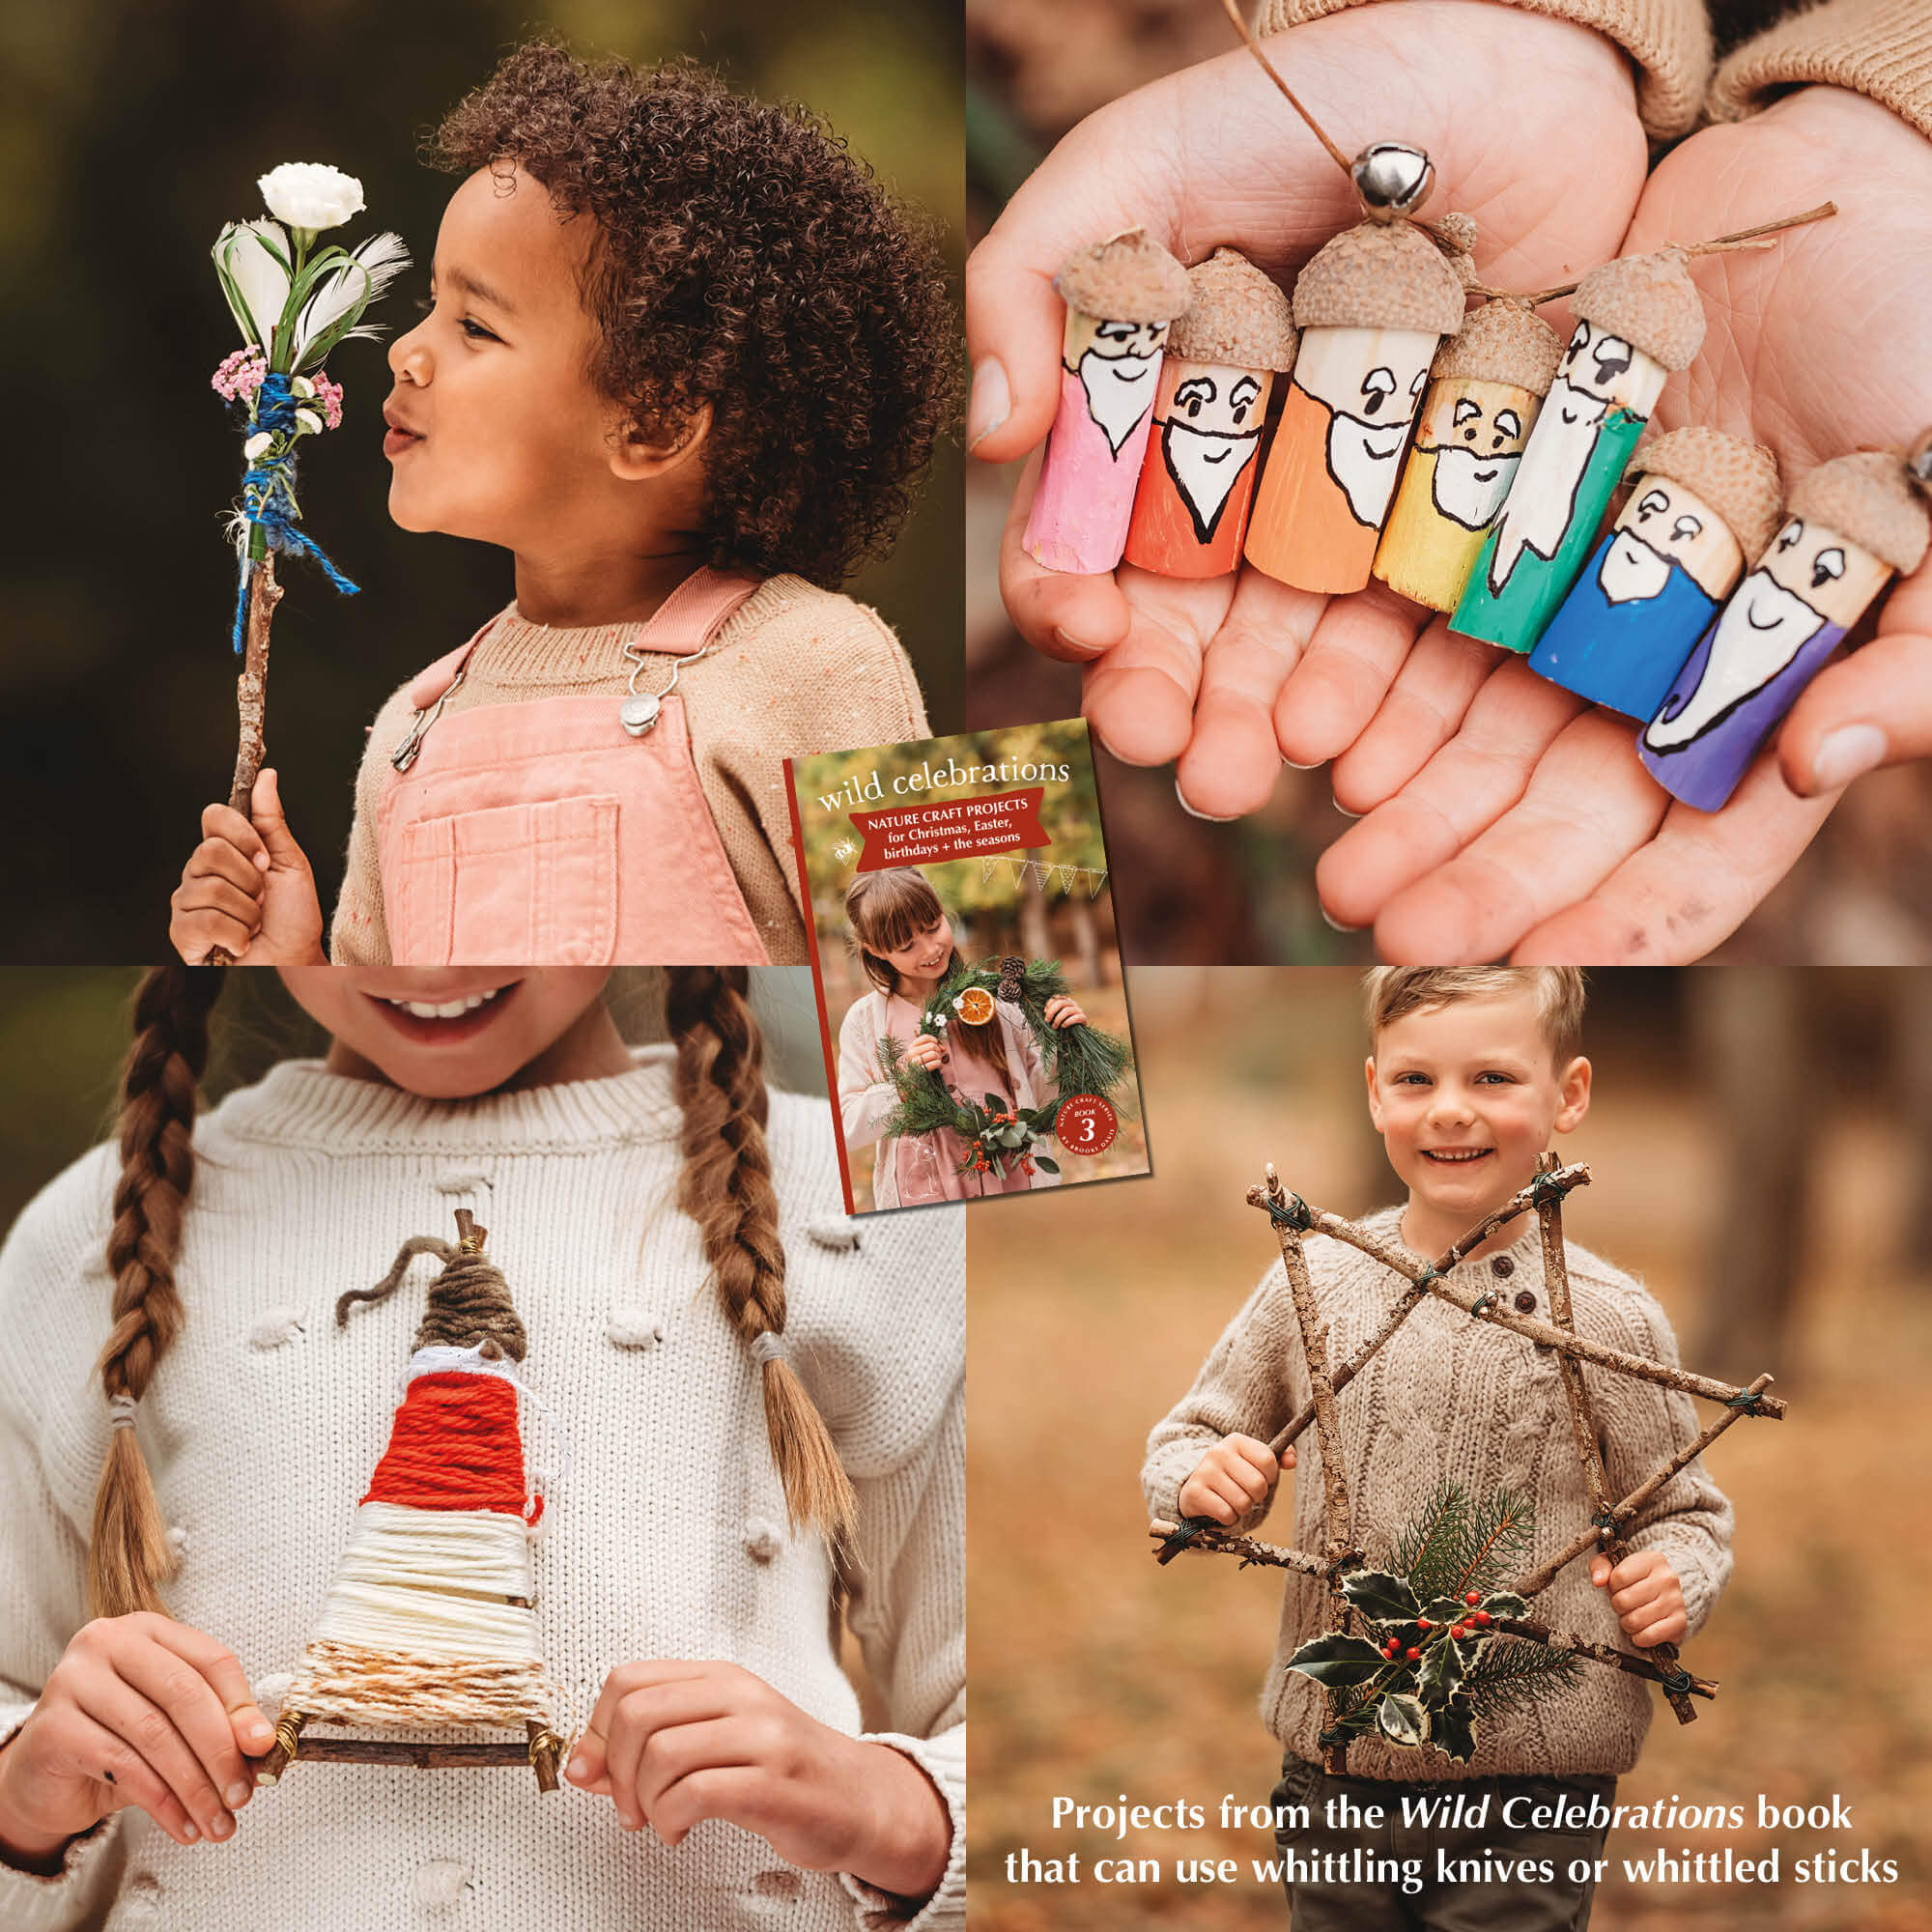 Whittling projects from Wild Celebrations book. Wood whittling knives for kids for all your nature craft projects, suitable for beginners and advanced woodworkers. Made by Opinel from Your Wild Books.